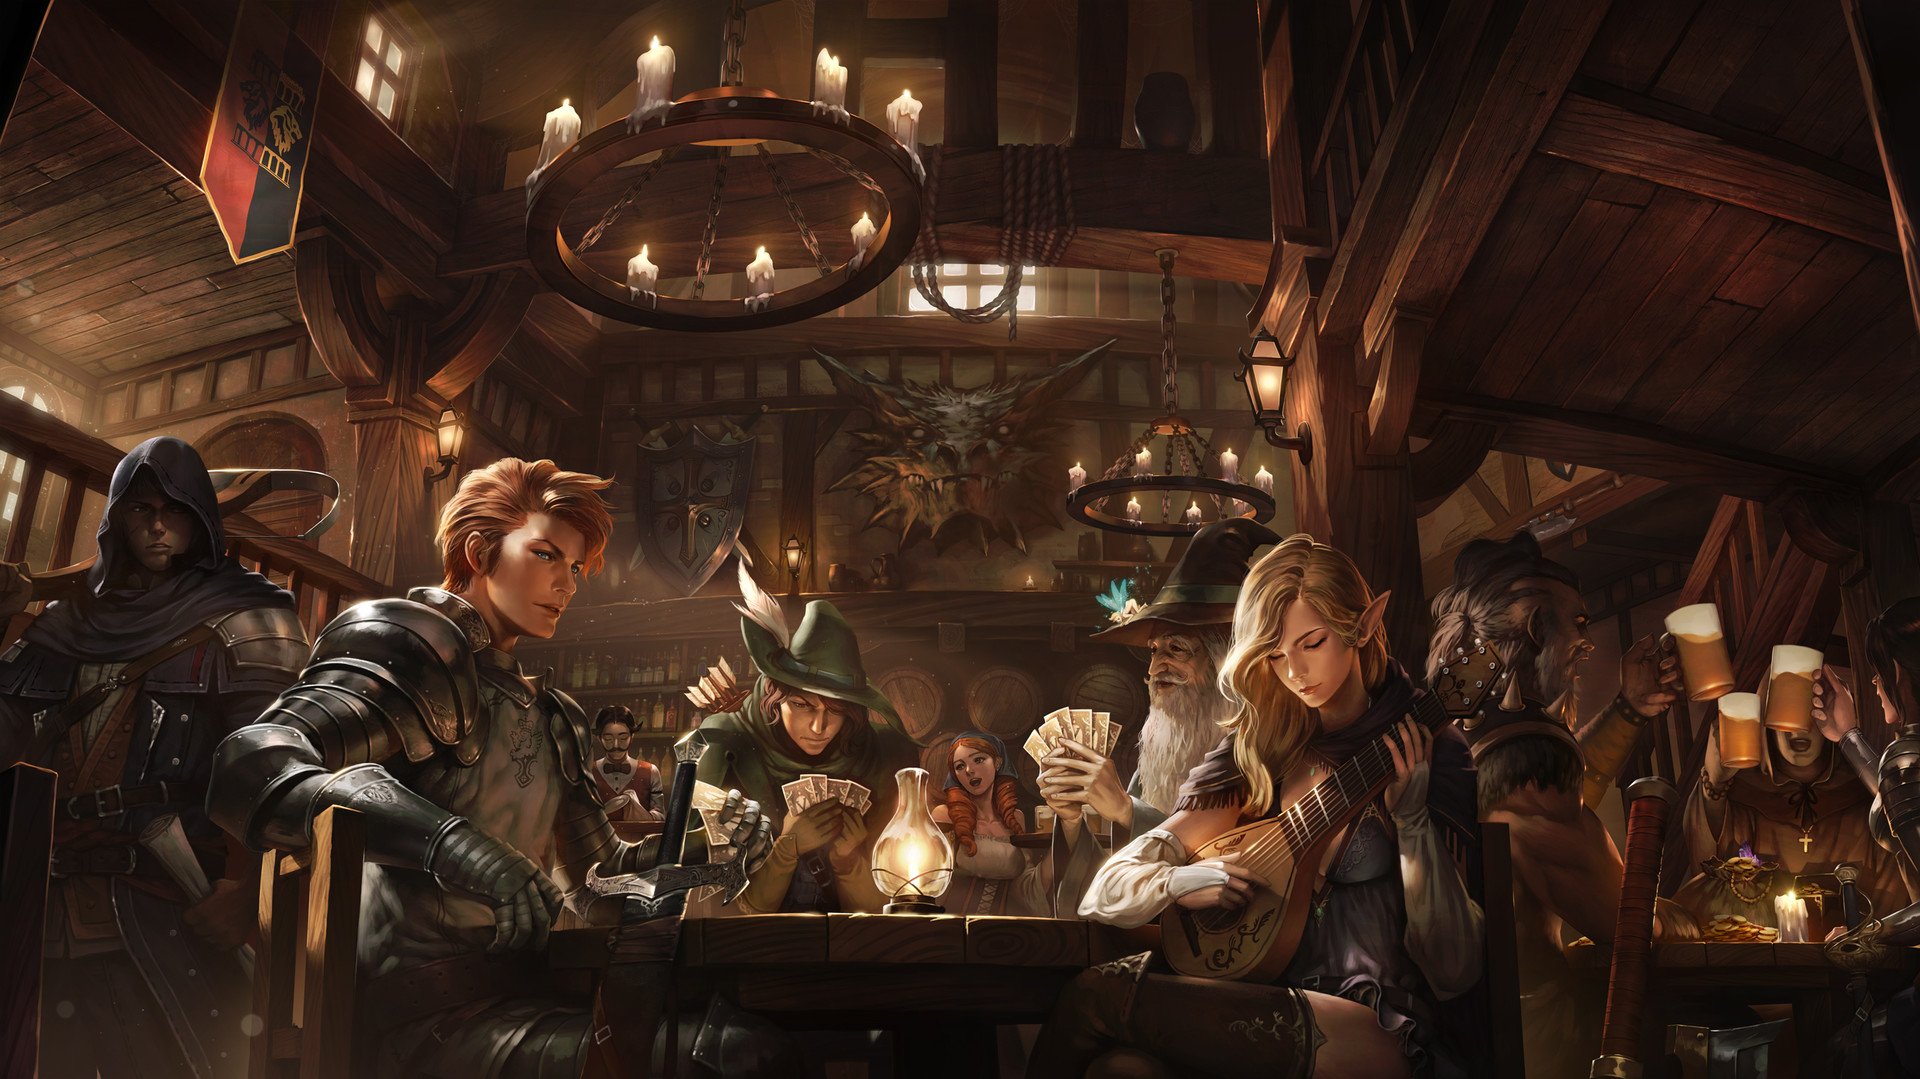 pointed ears, Fantasy art, Tavern, Candles Wallpaper